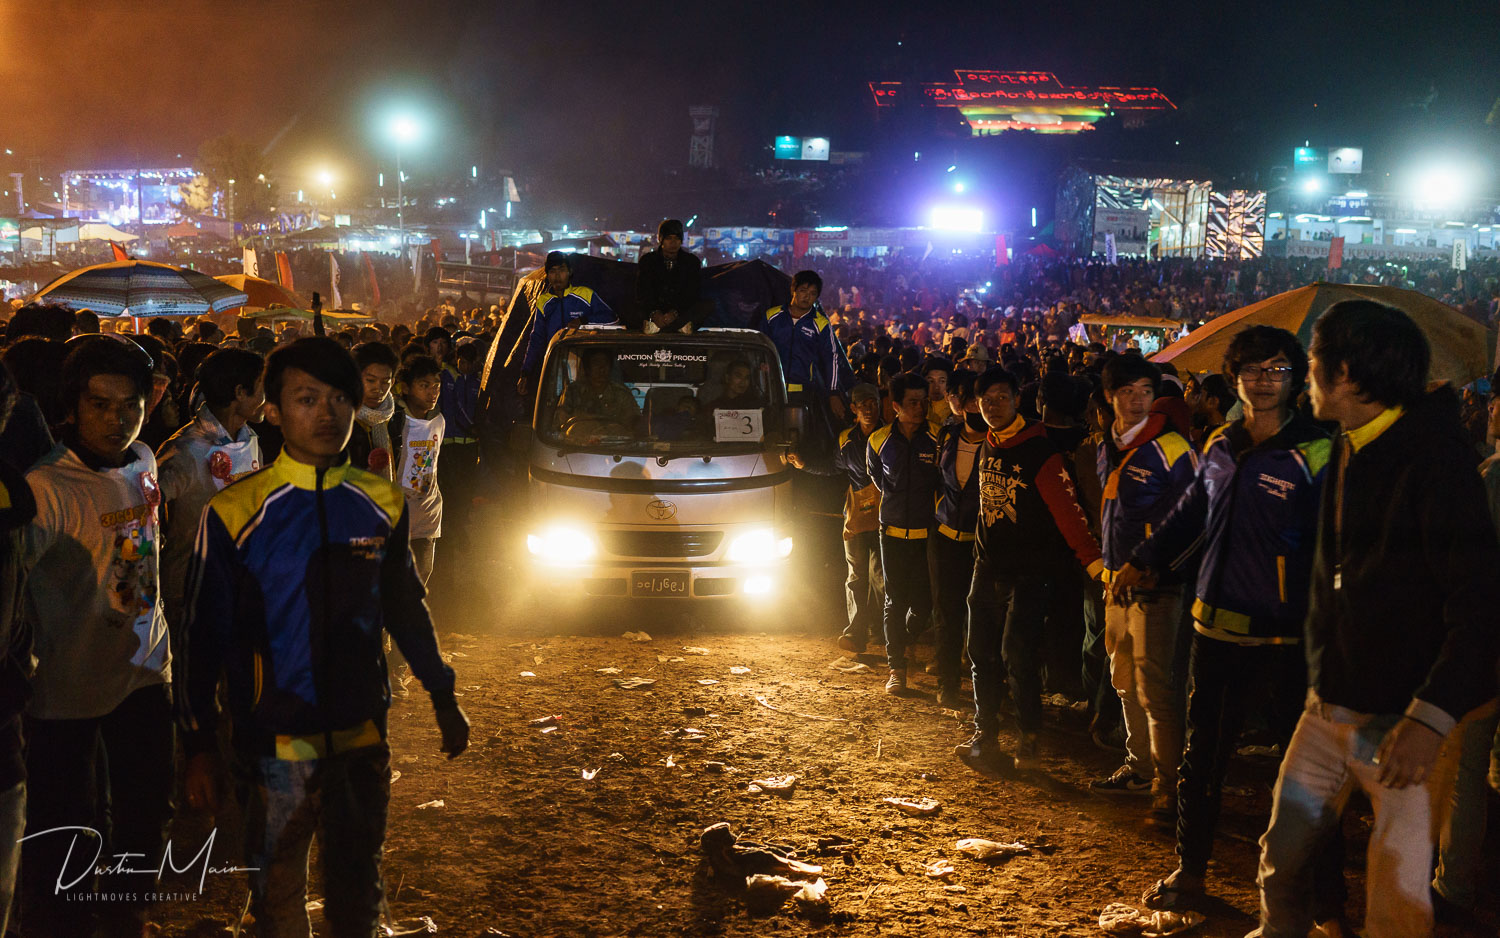  The crew drives onto the festival grounds just outside of Taunggyi.  © Dustin Main 2016 